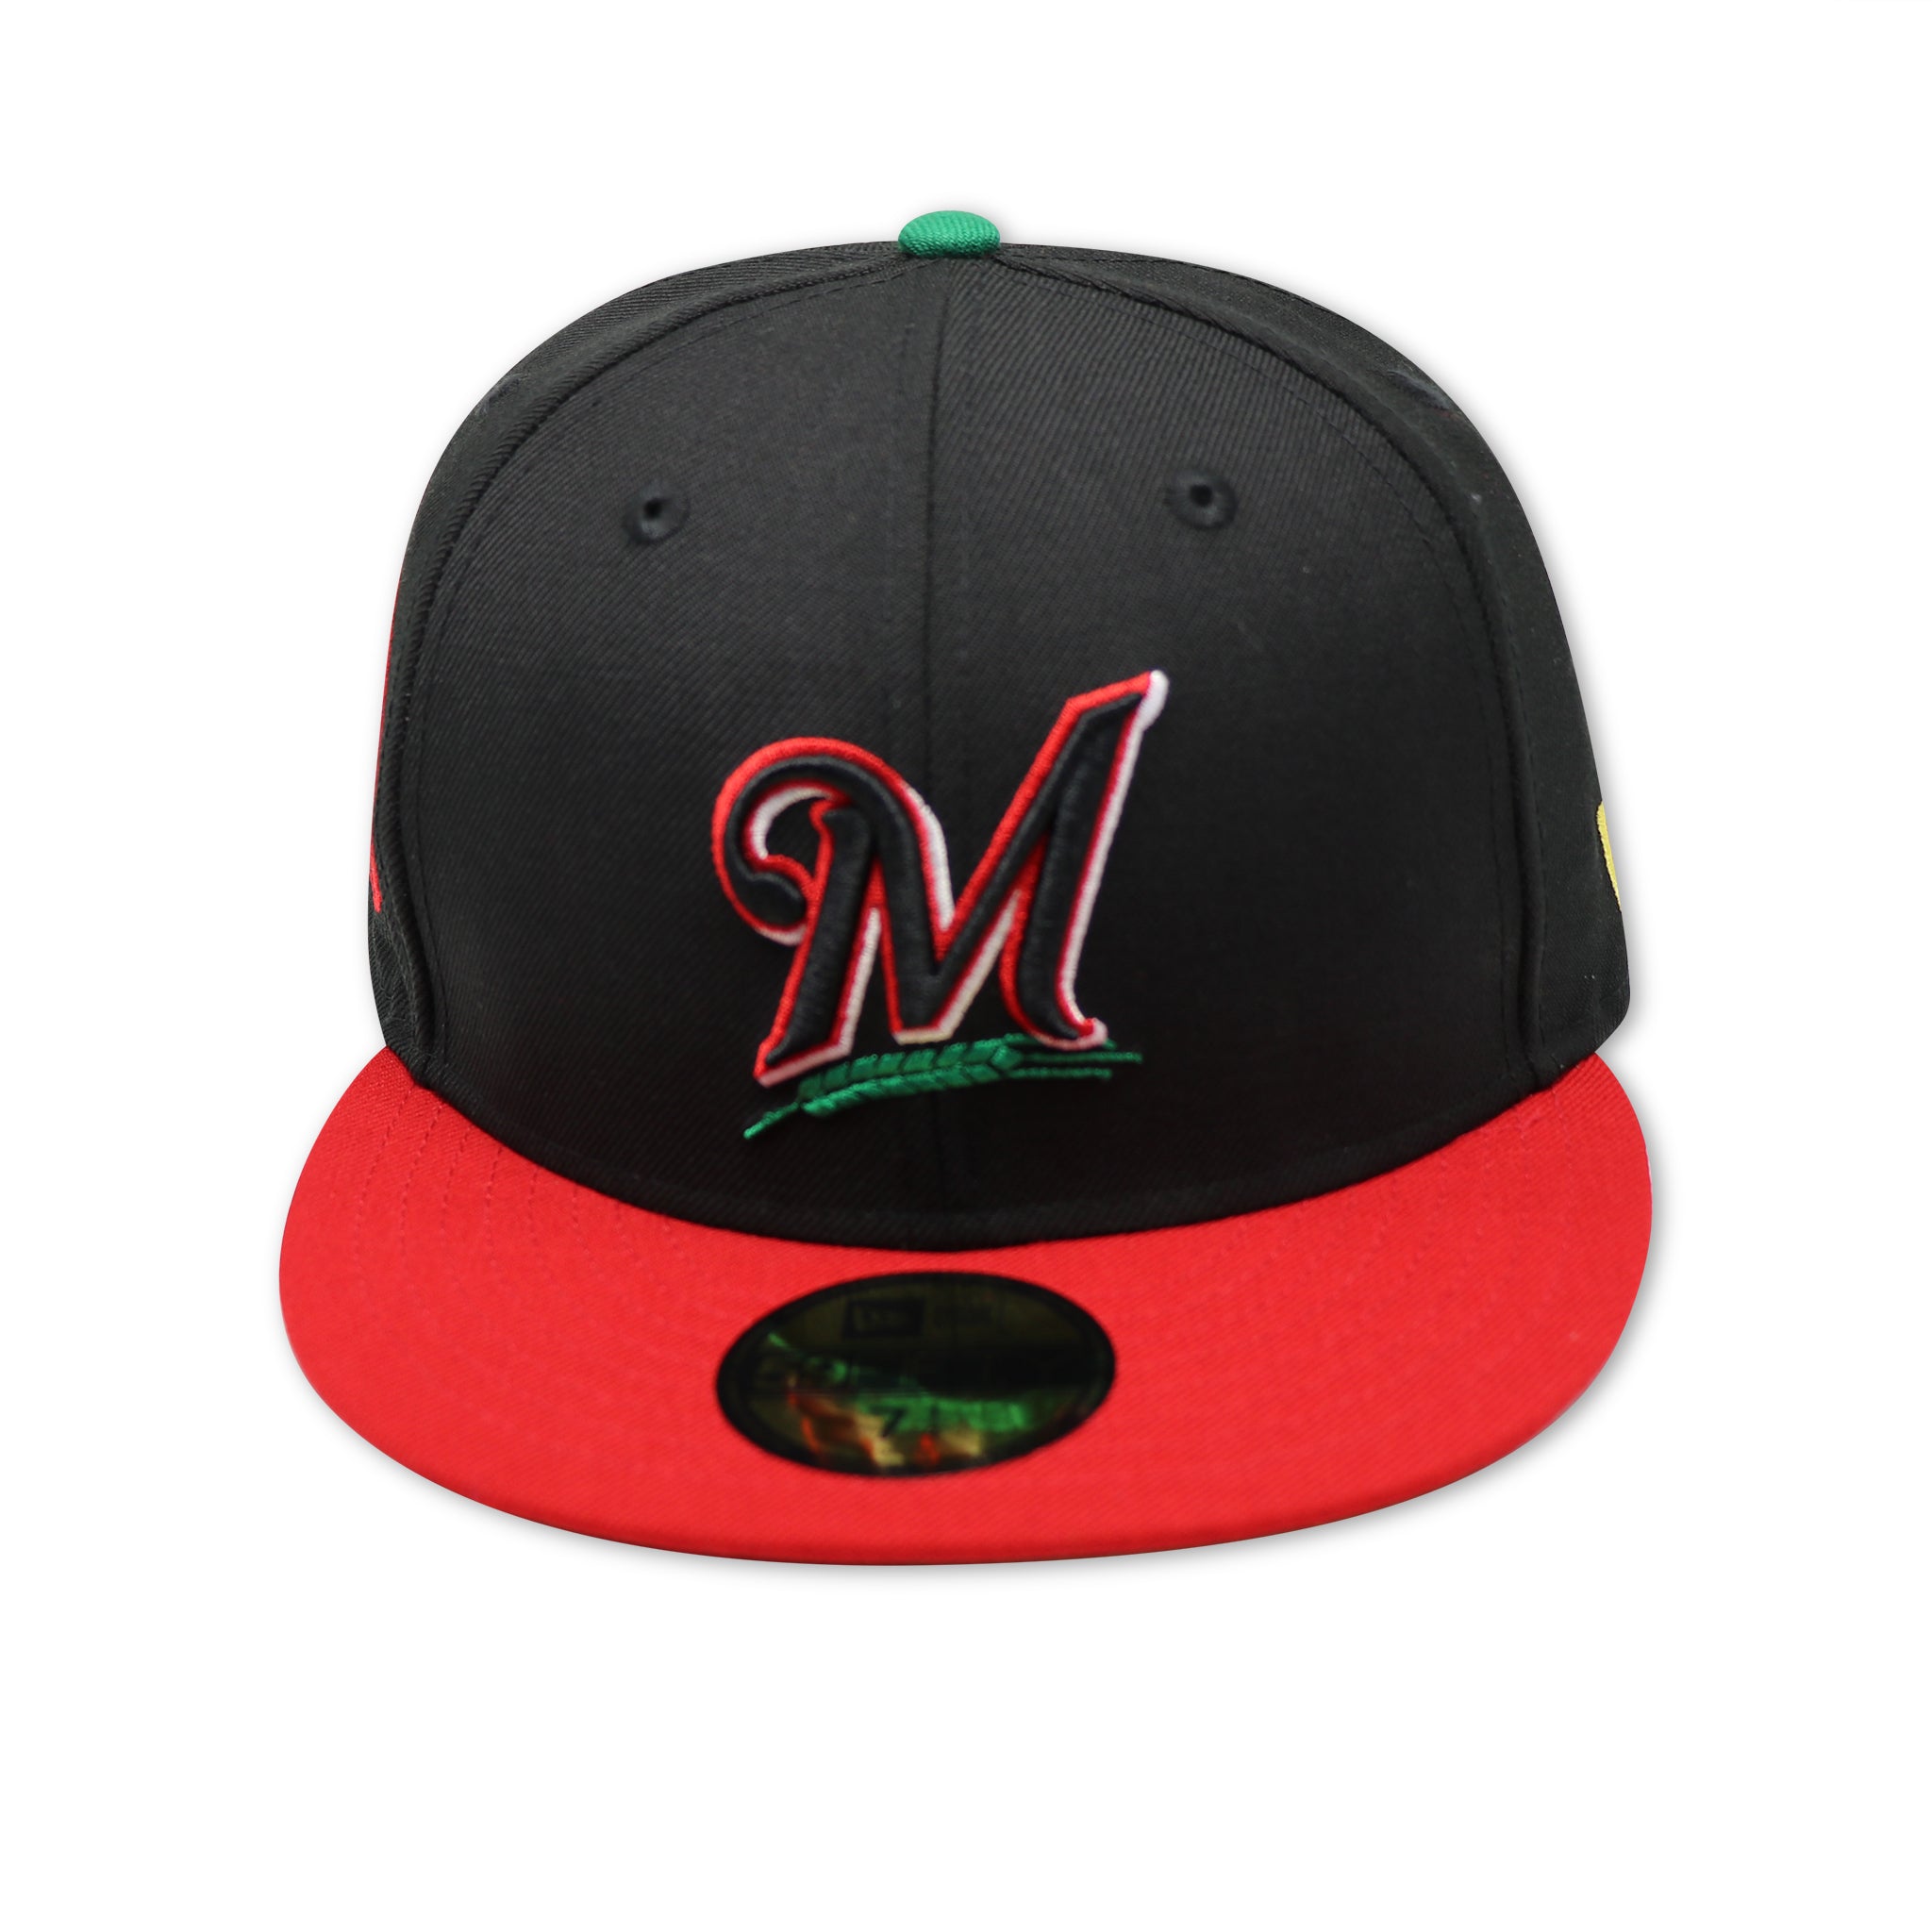 MILWAUKEE BREWERS (MARVIN) (1982-2007 SILVER ANNIVERSARY) NEW ERA 59FIFTY FITTED (GREEN UNDER VISOR)